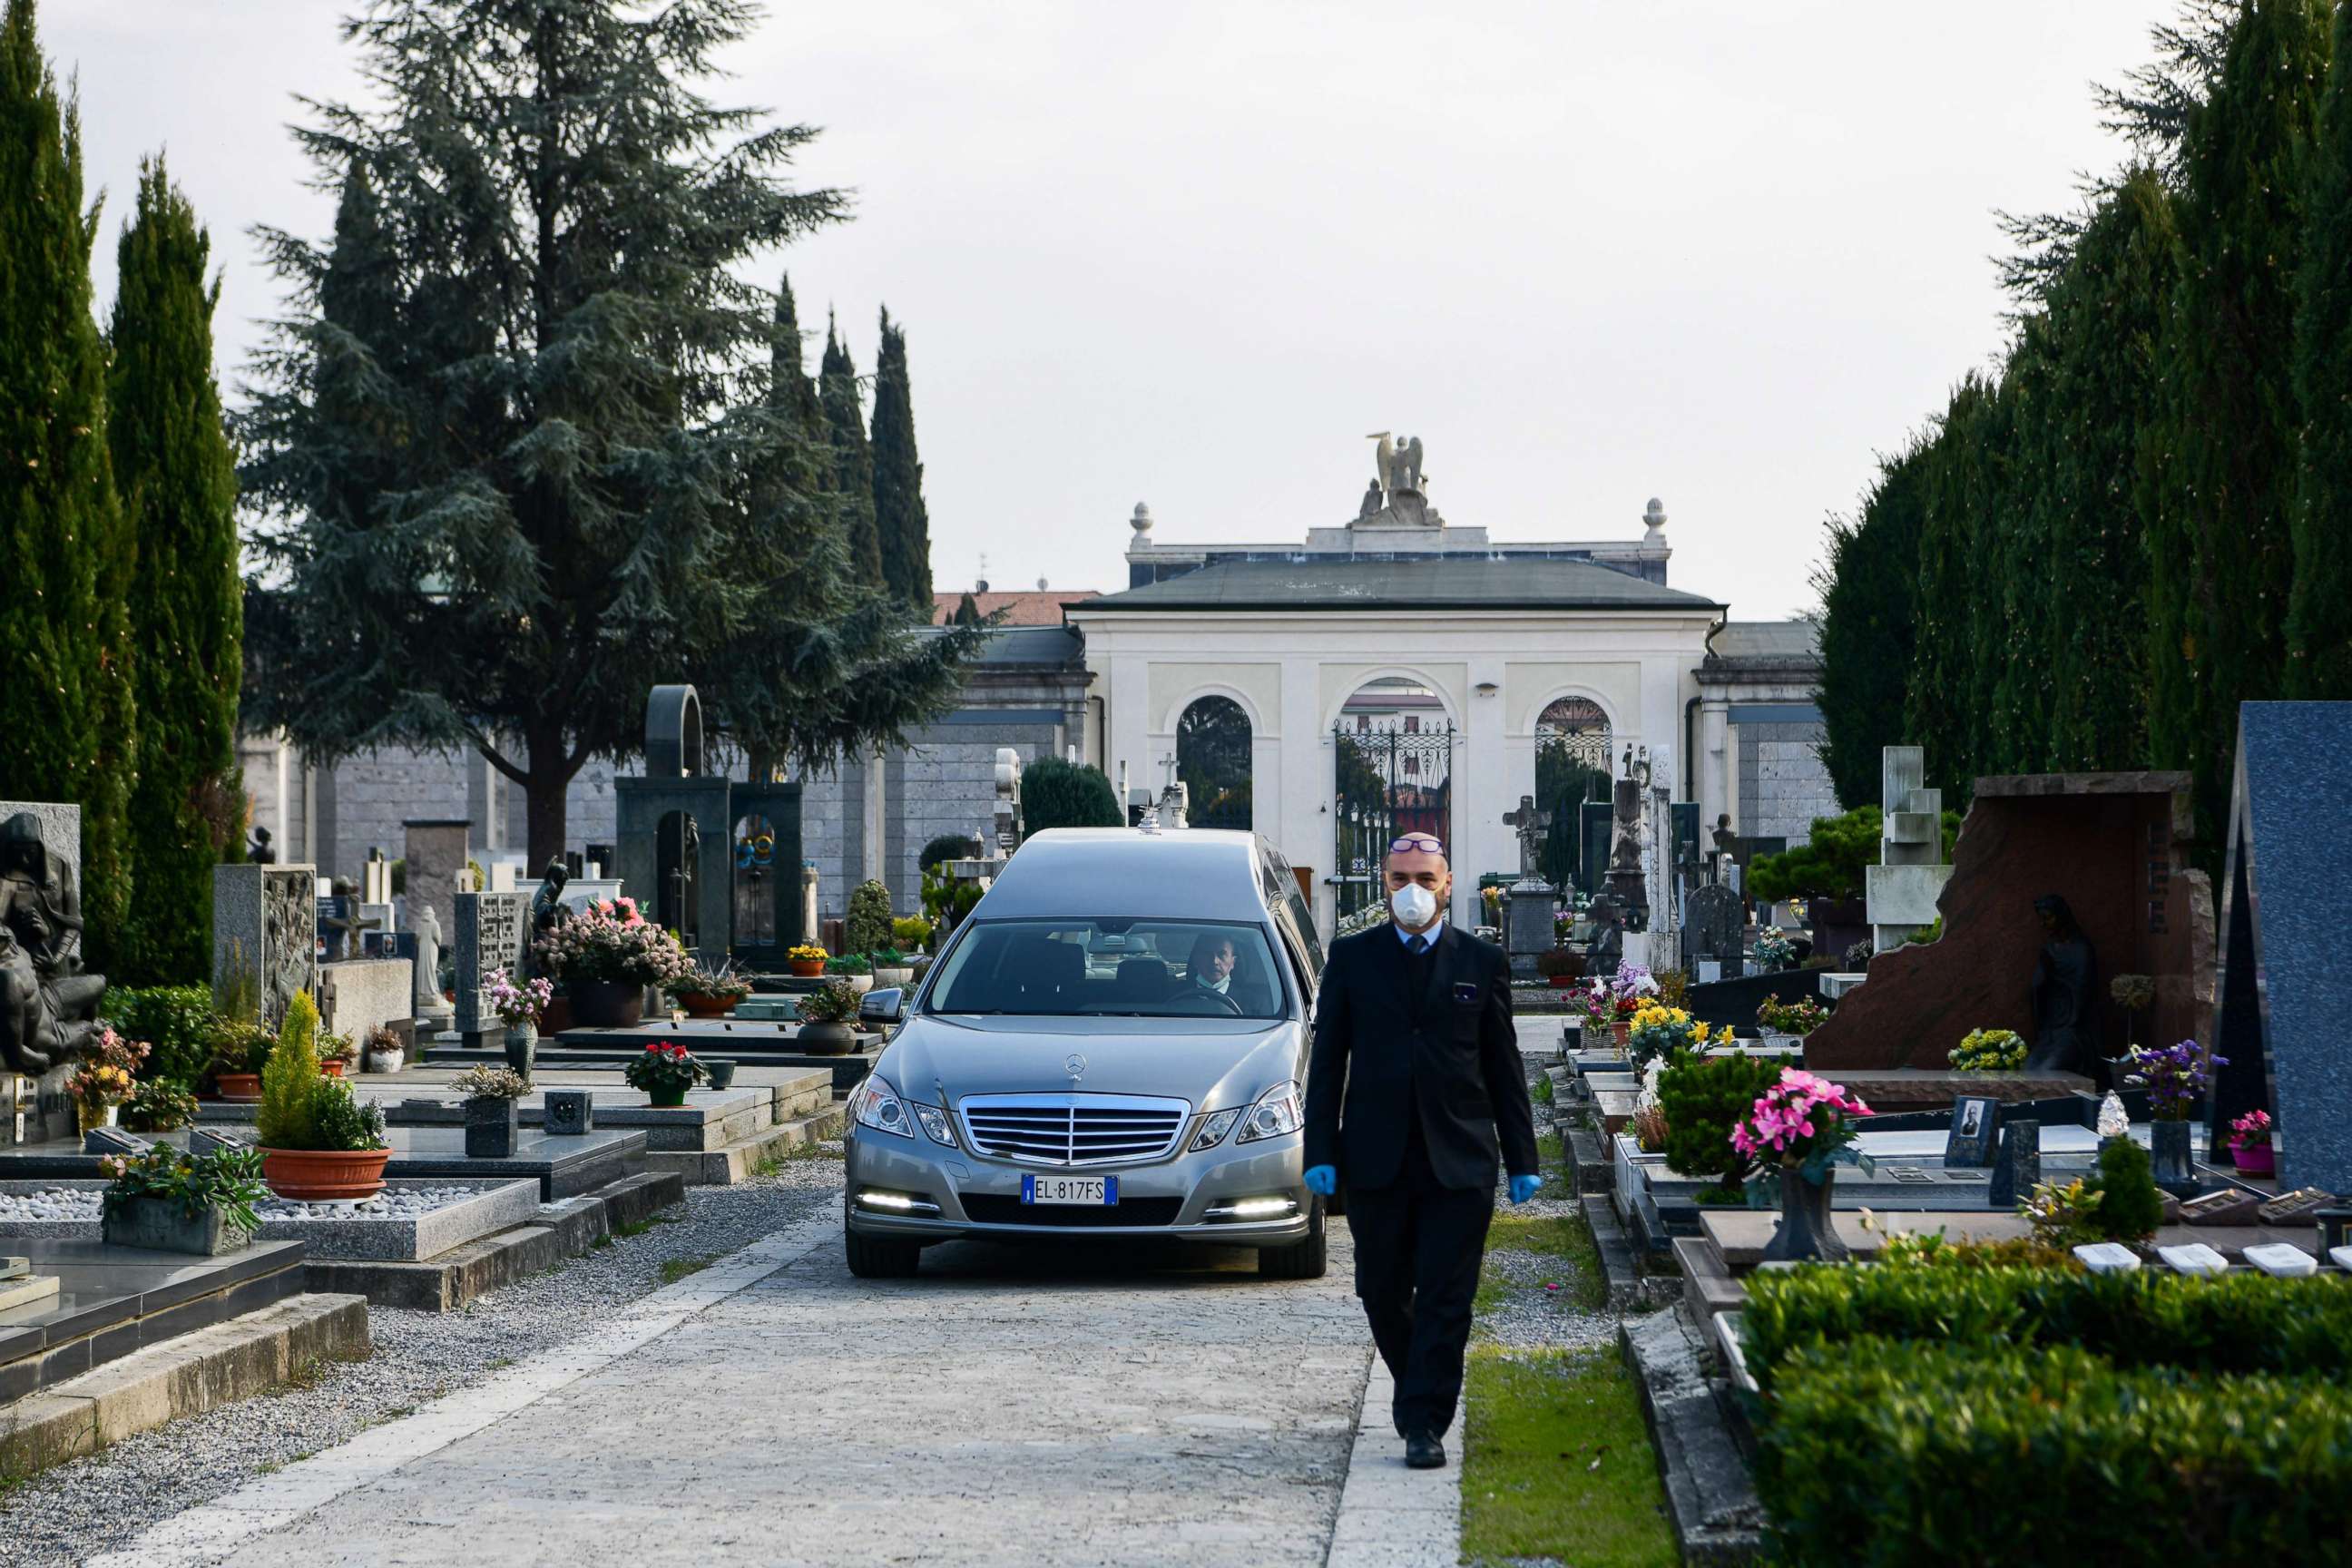 PHOTO: An undertaker wearing a face mask walks ahead of a hearse bringing the coffin of an elderly woman to a funeral service in the closed cemetery of Seriate, near Bergamo, Italy, on March 20, 2020.